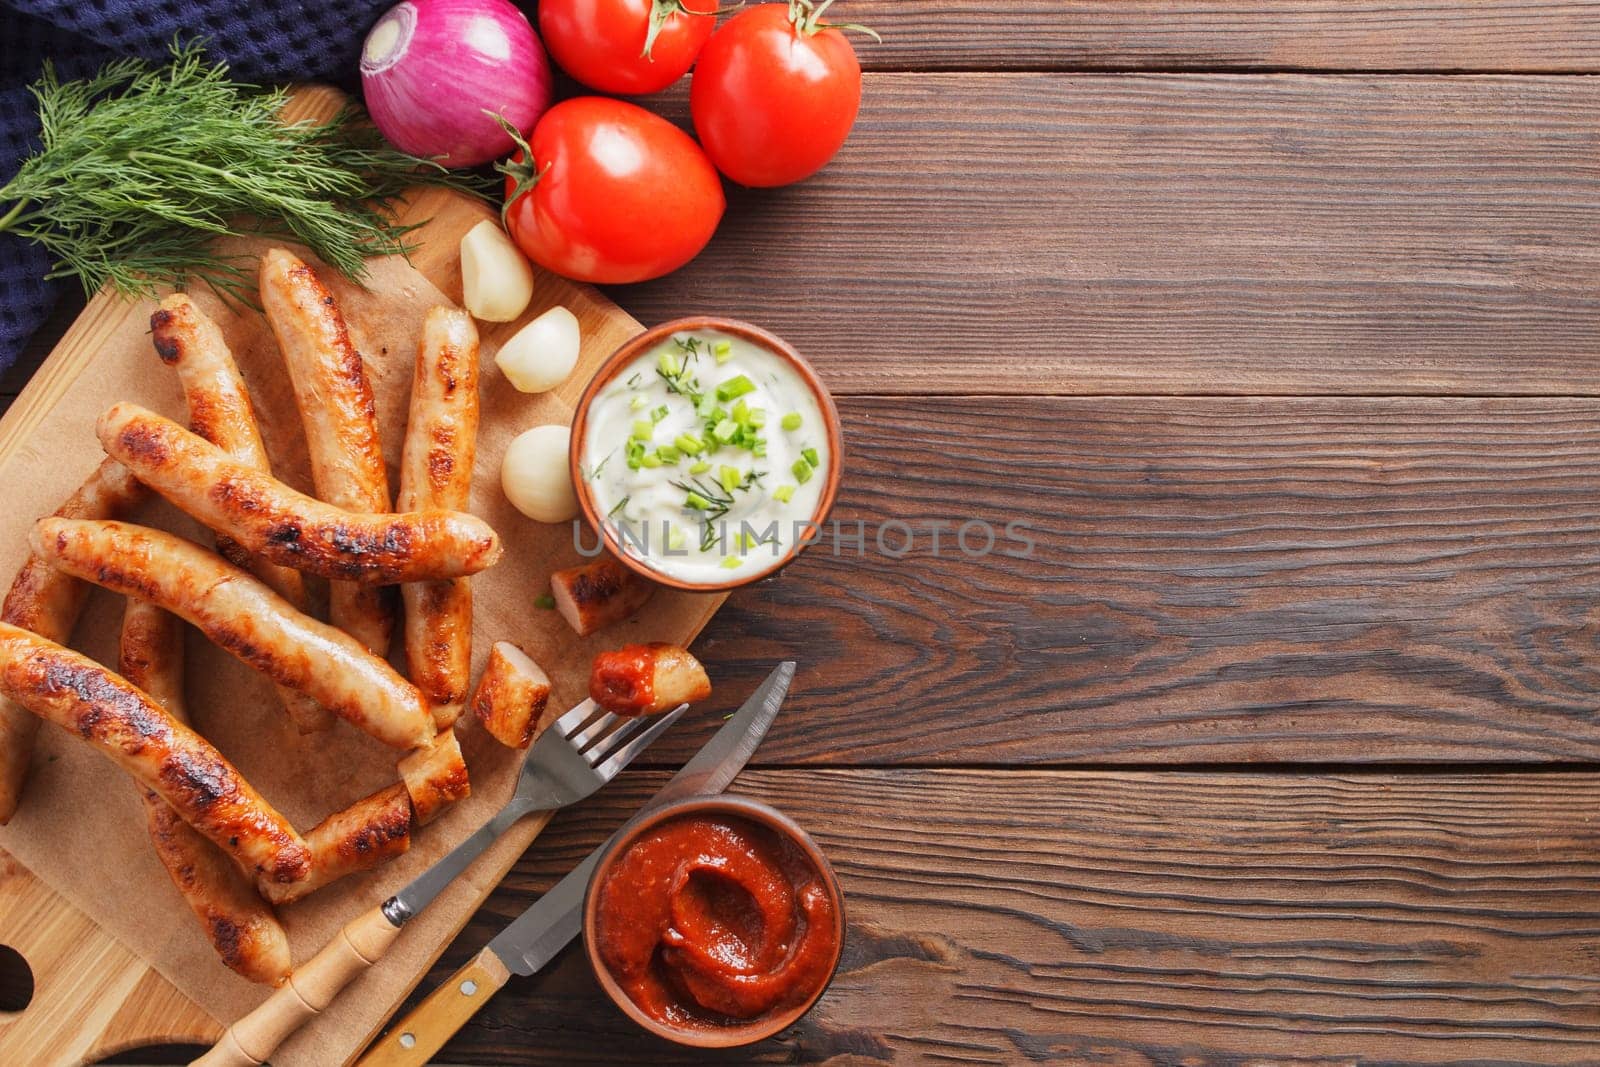 Delicious sausages on a wooden board with various sauces and fresh vegetables on a wooden table. copy space.